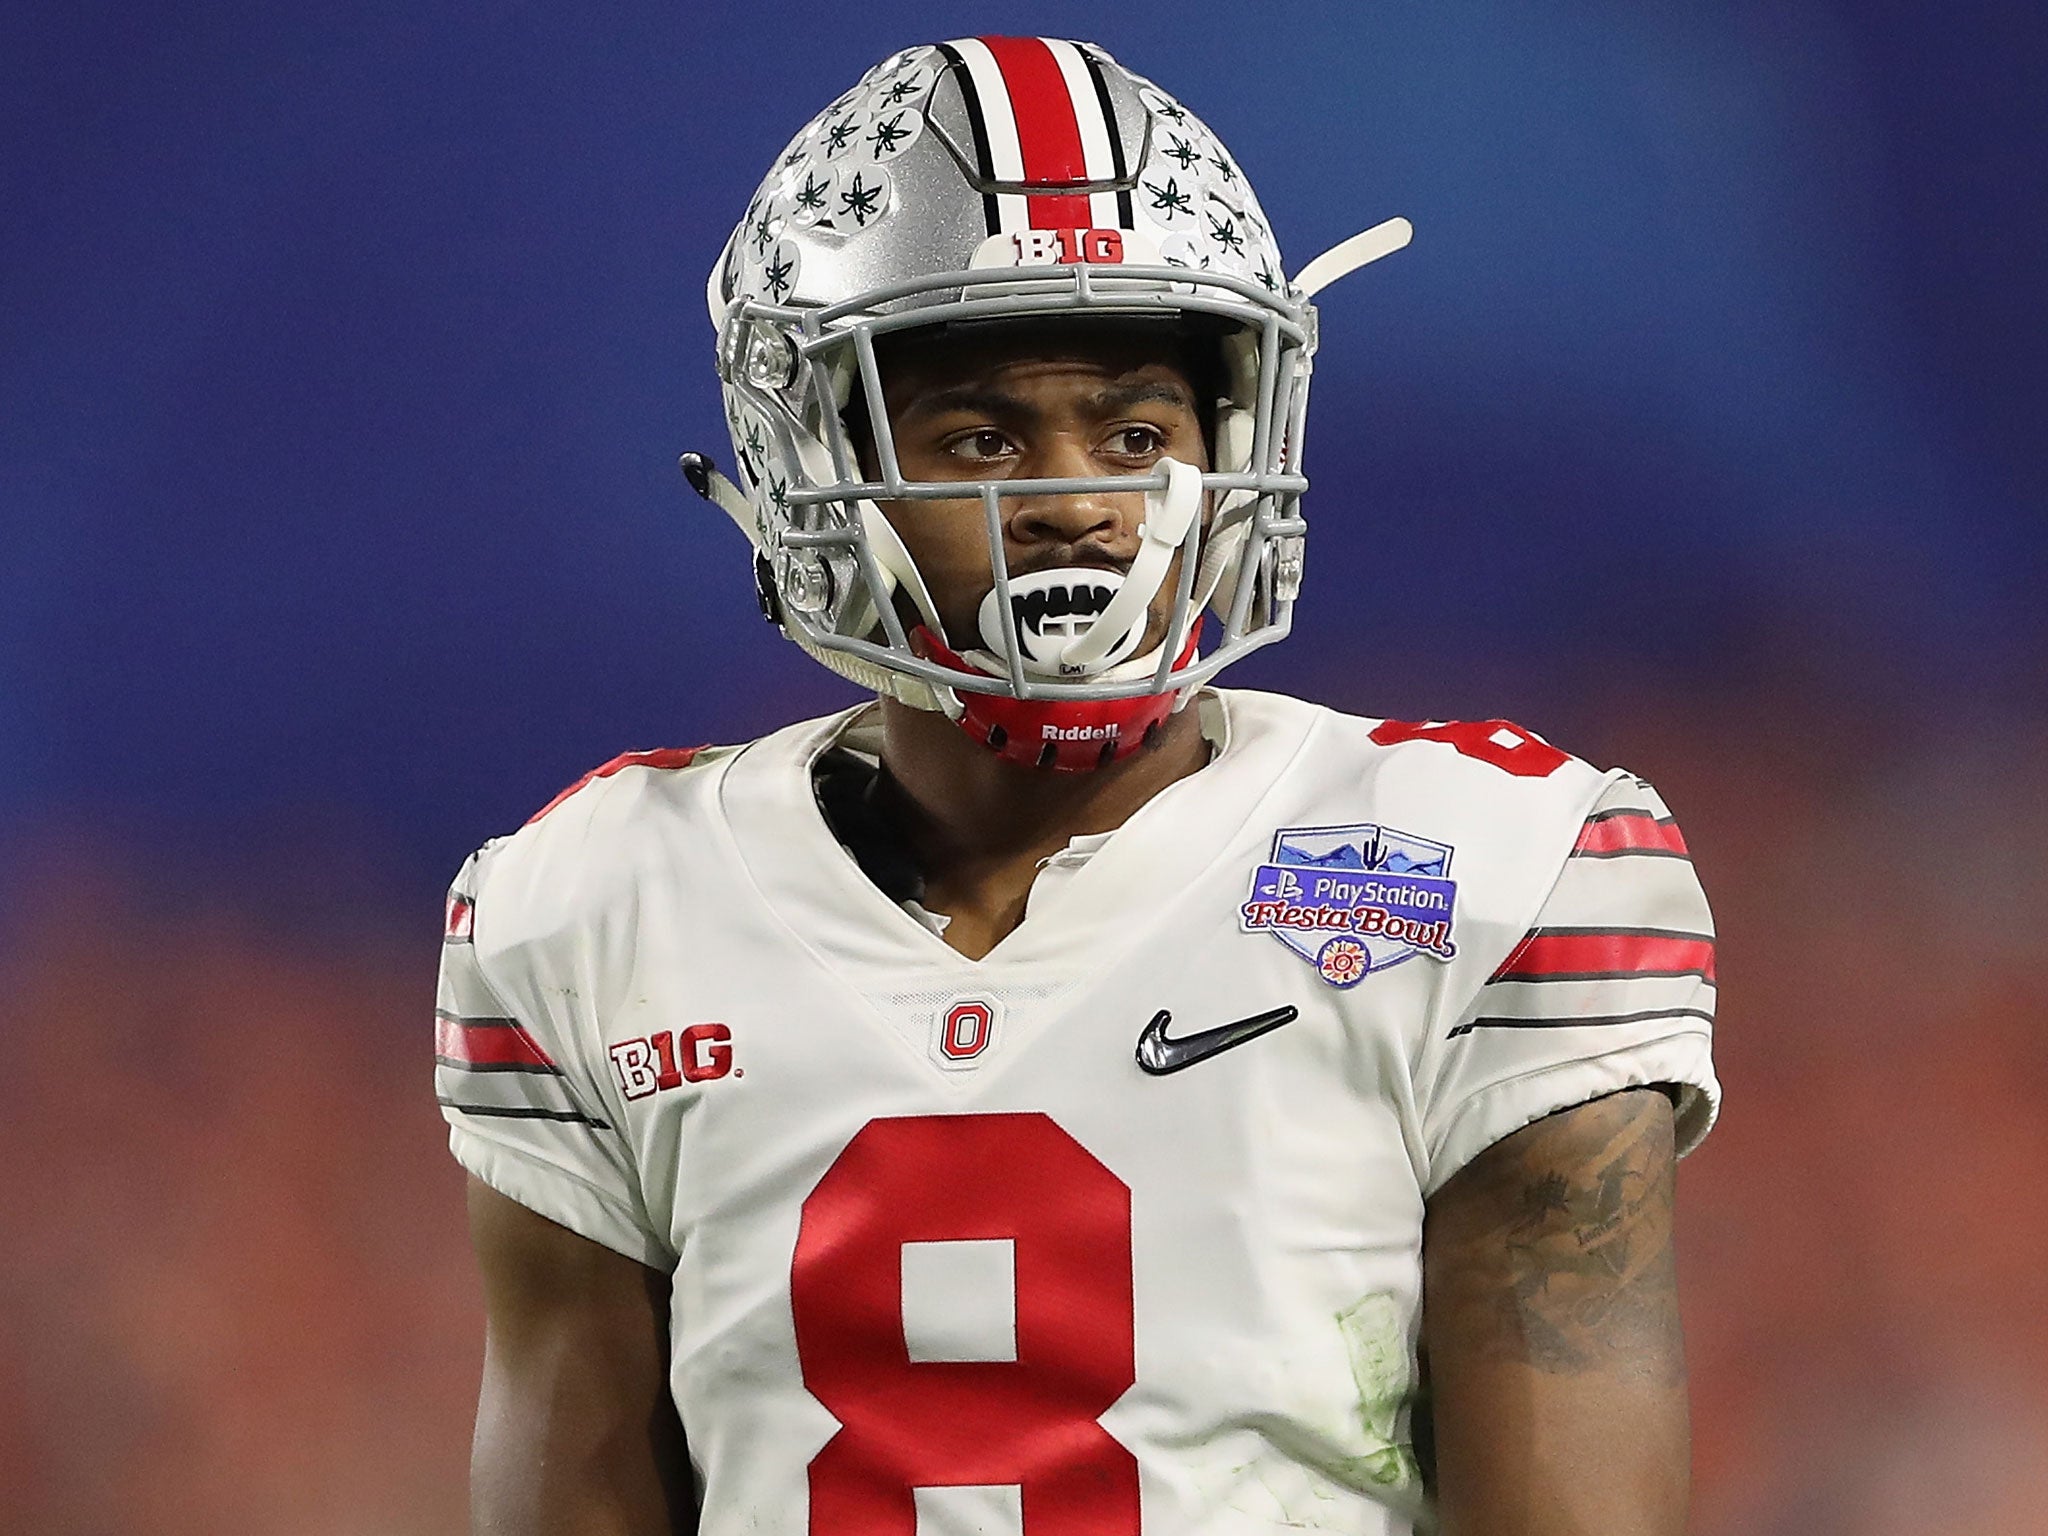 Conley has been one of Ohio State's star players over the last two years